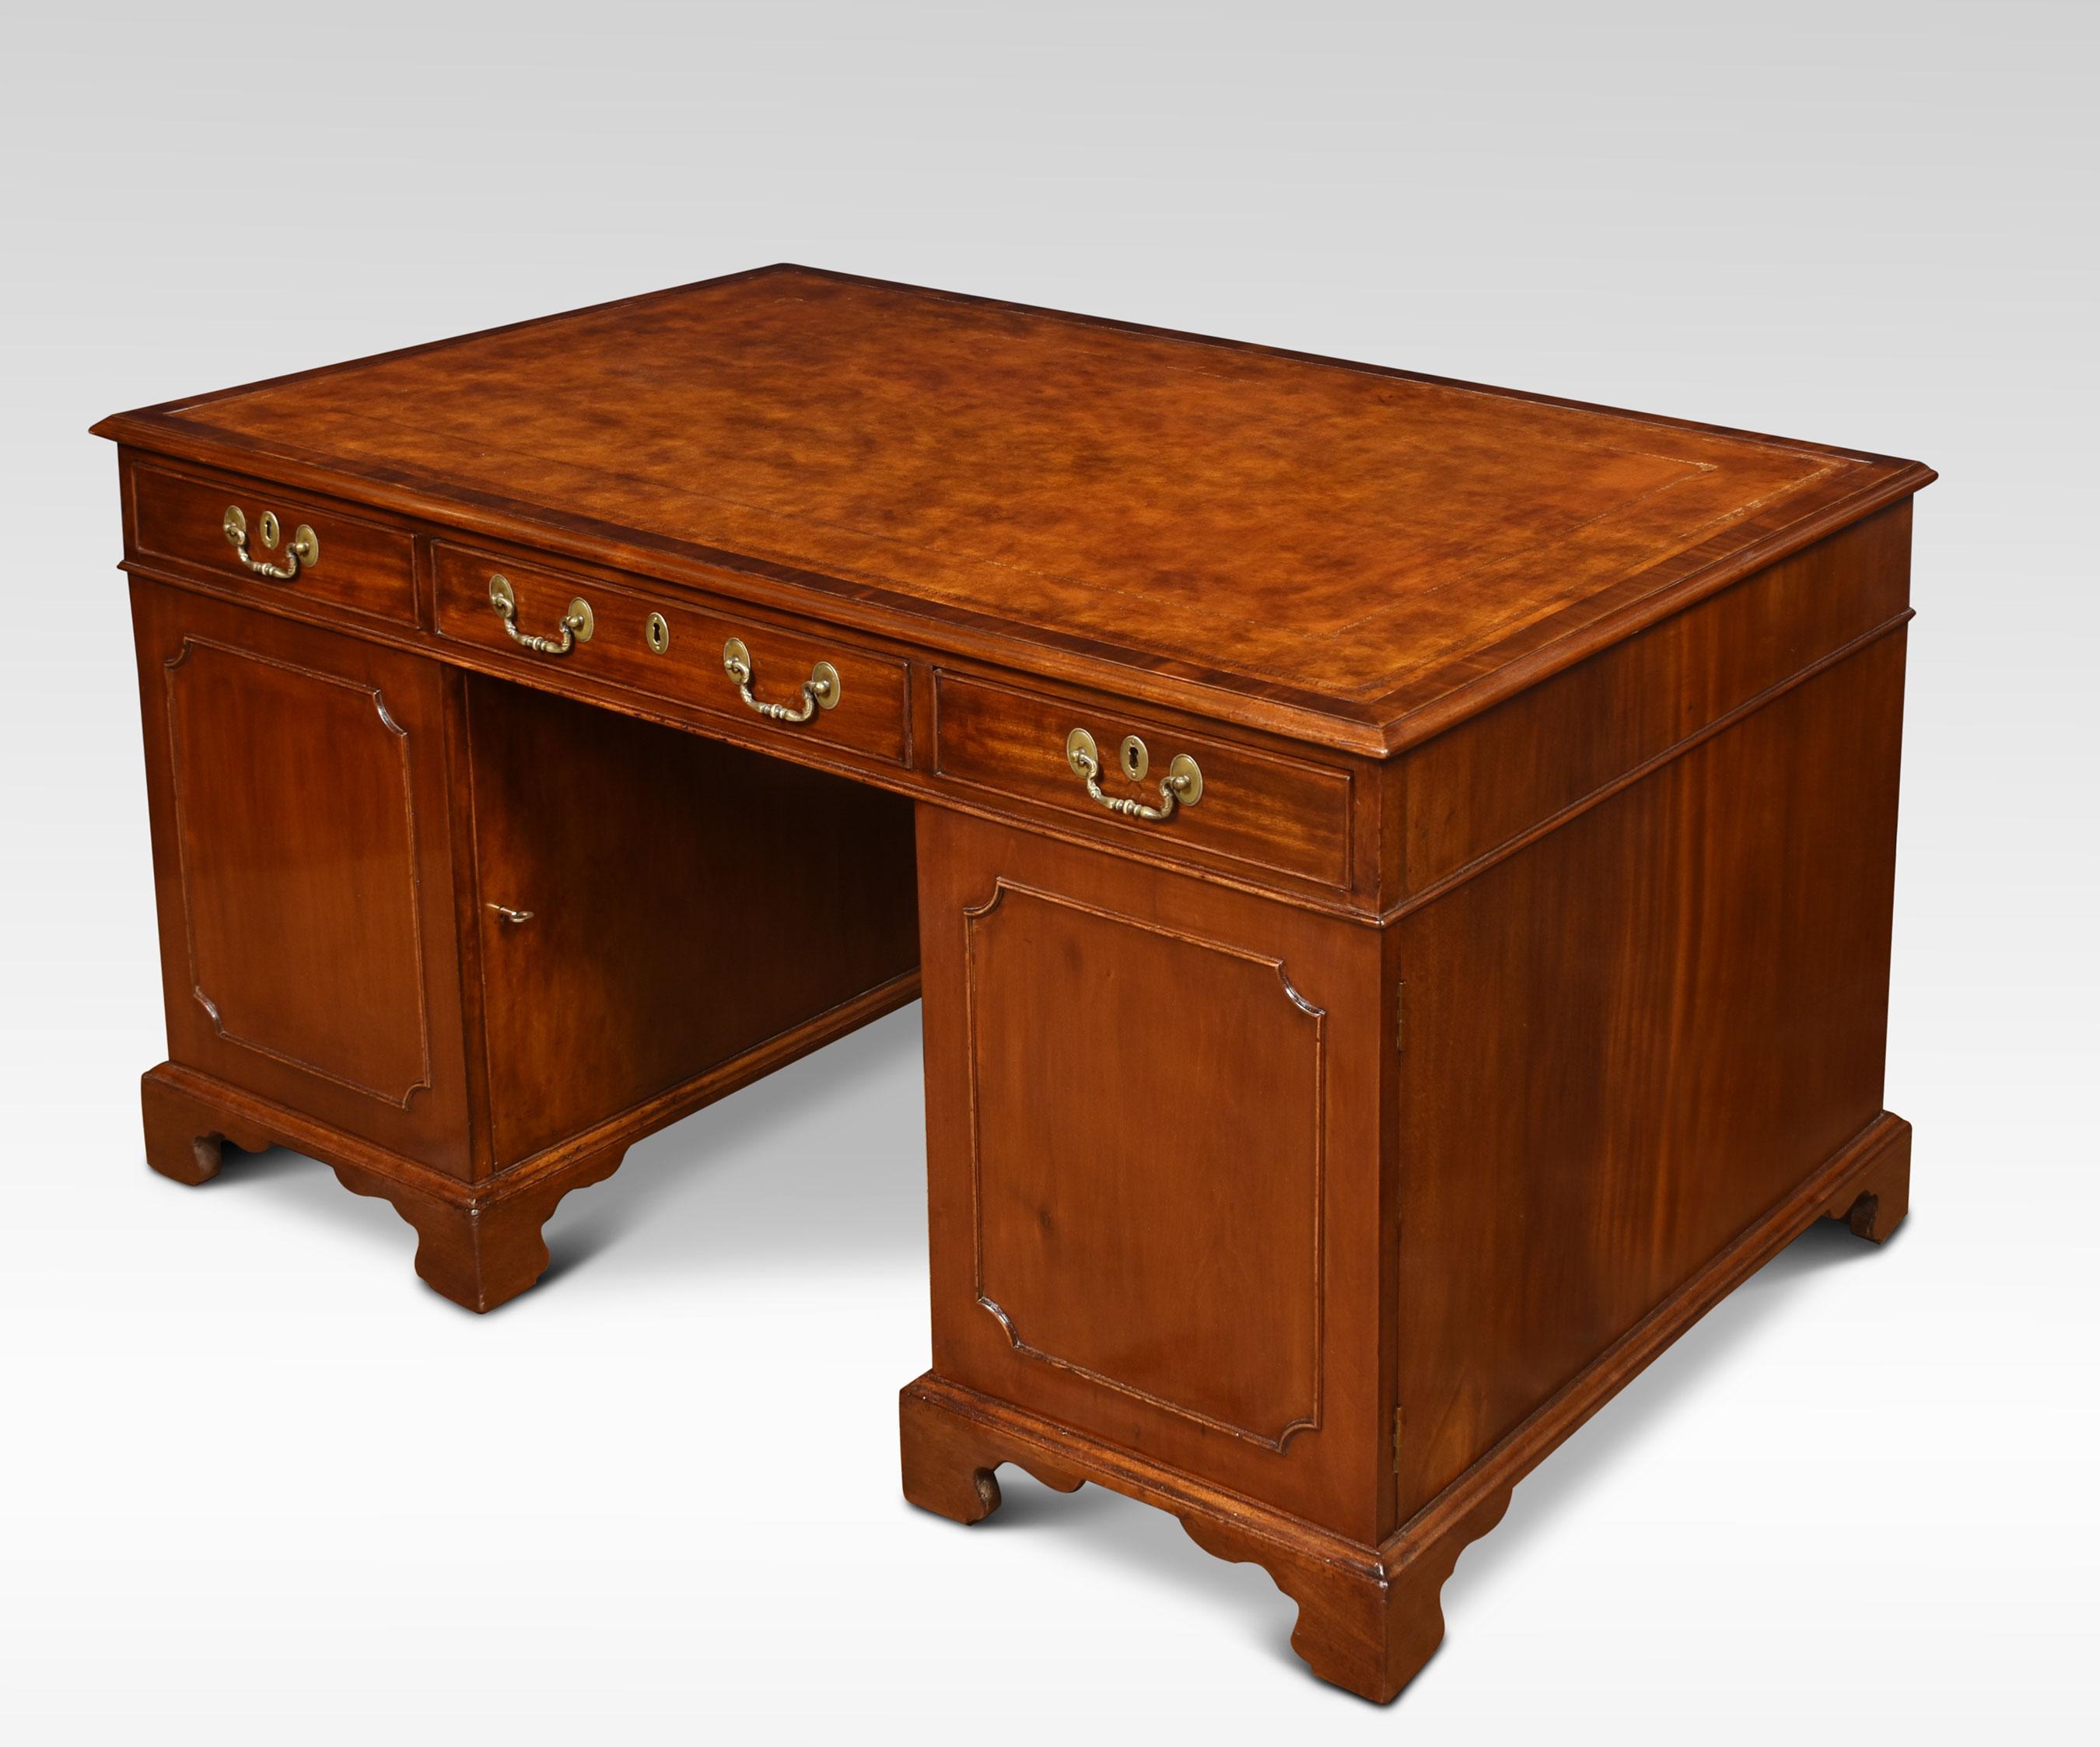 Victorian Mahogany Partners Desk In Good Condition For Sale In Cheshire, GB